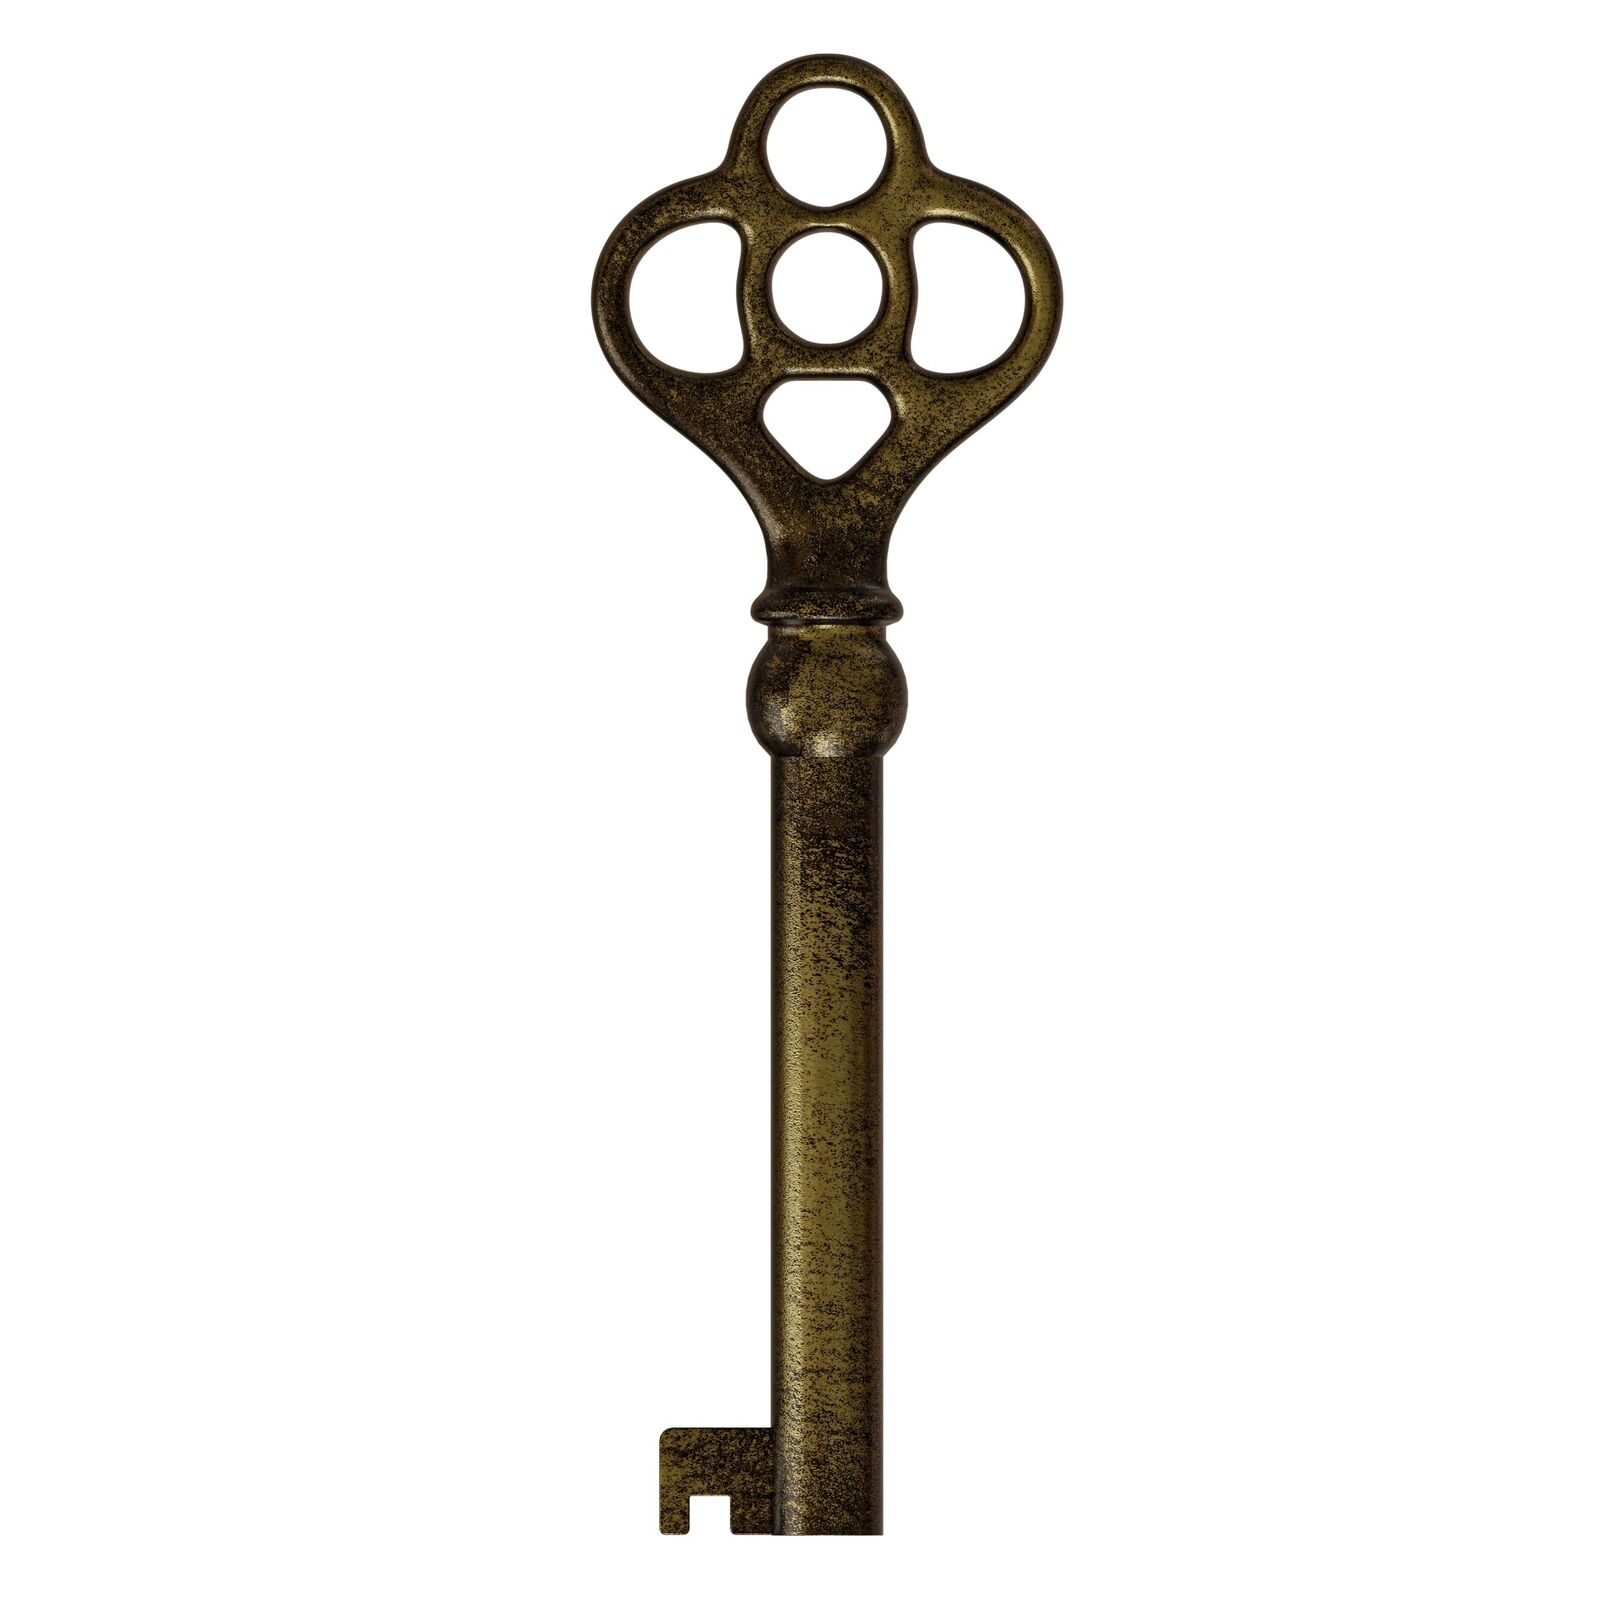 KY-3 Hollow Barrel Replacement Skeleton Key (Pack of 1, Antique Brass)